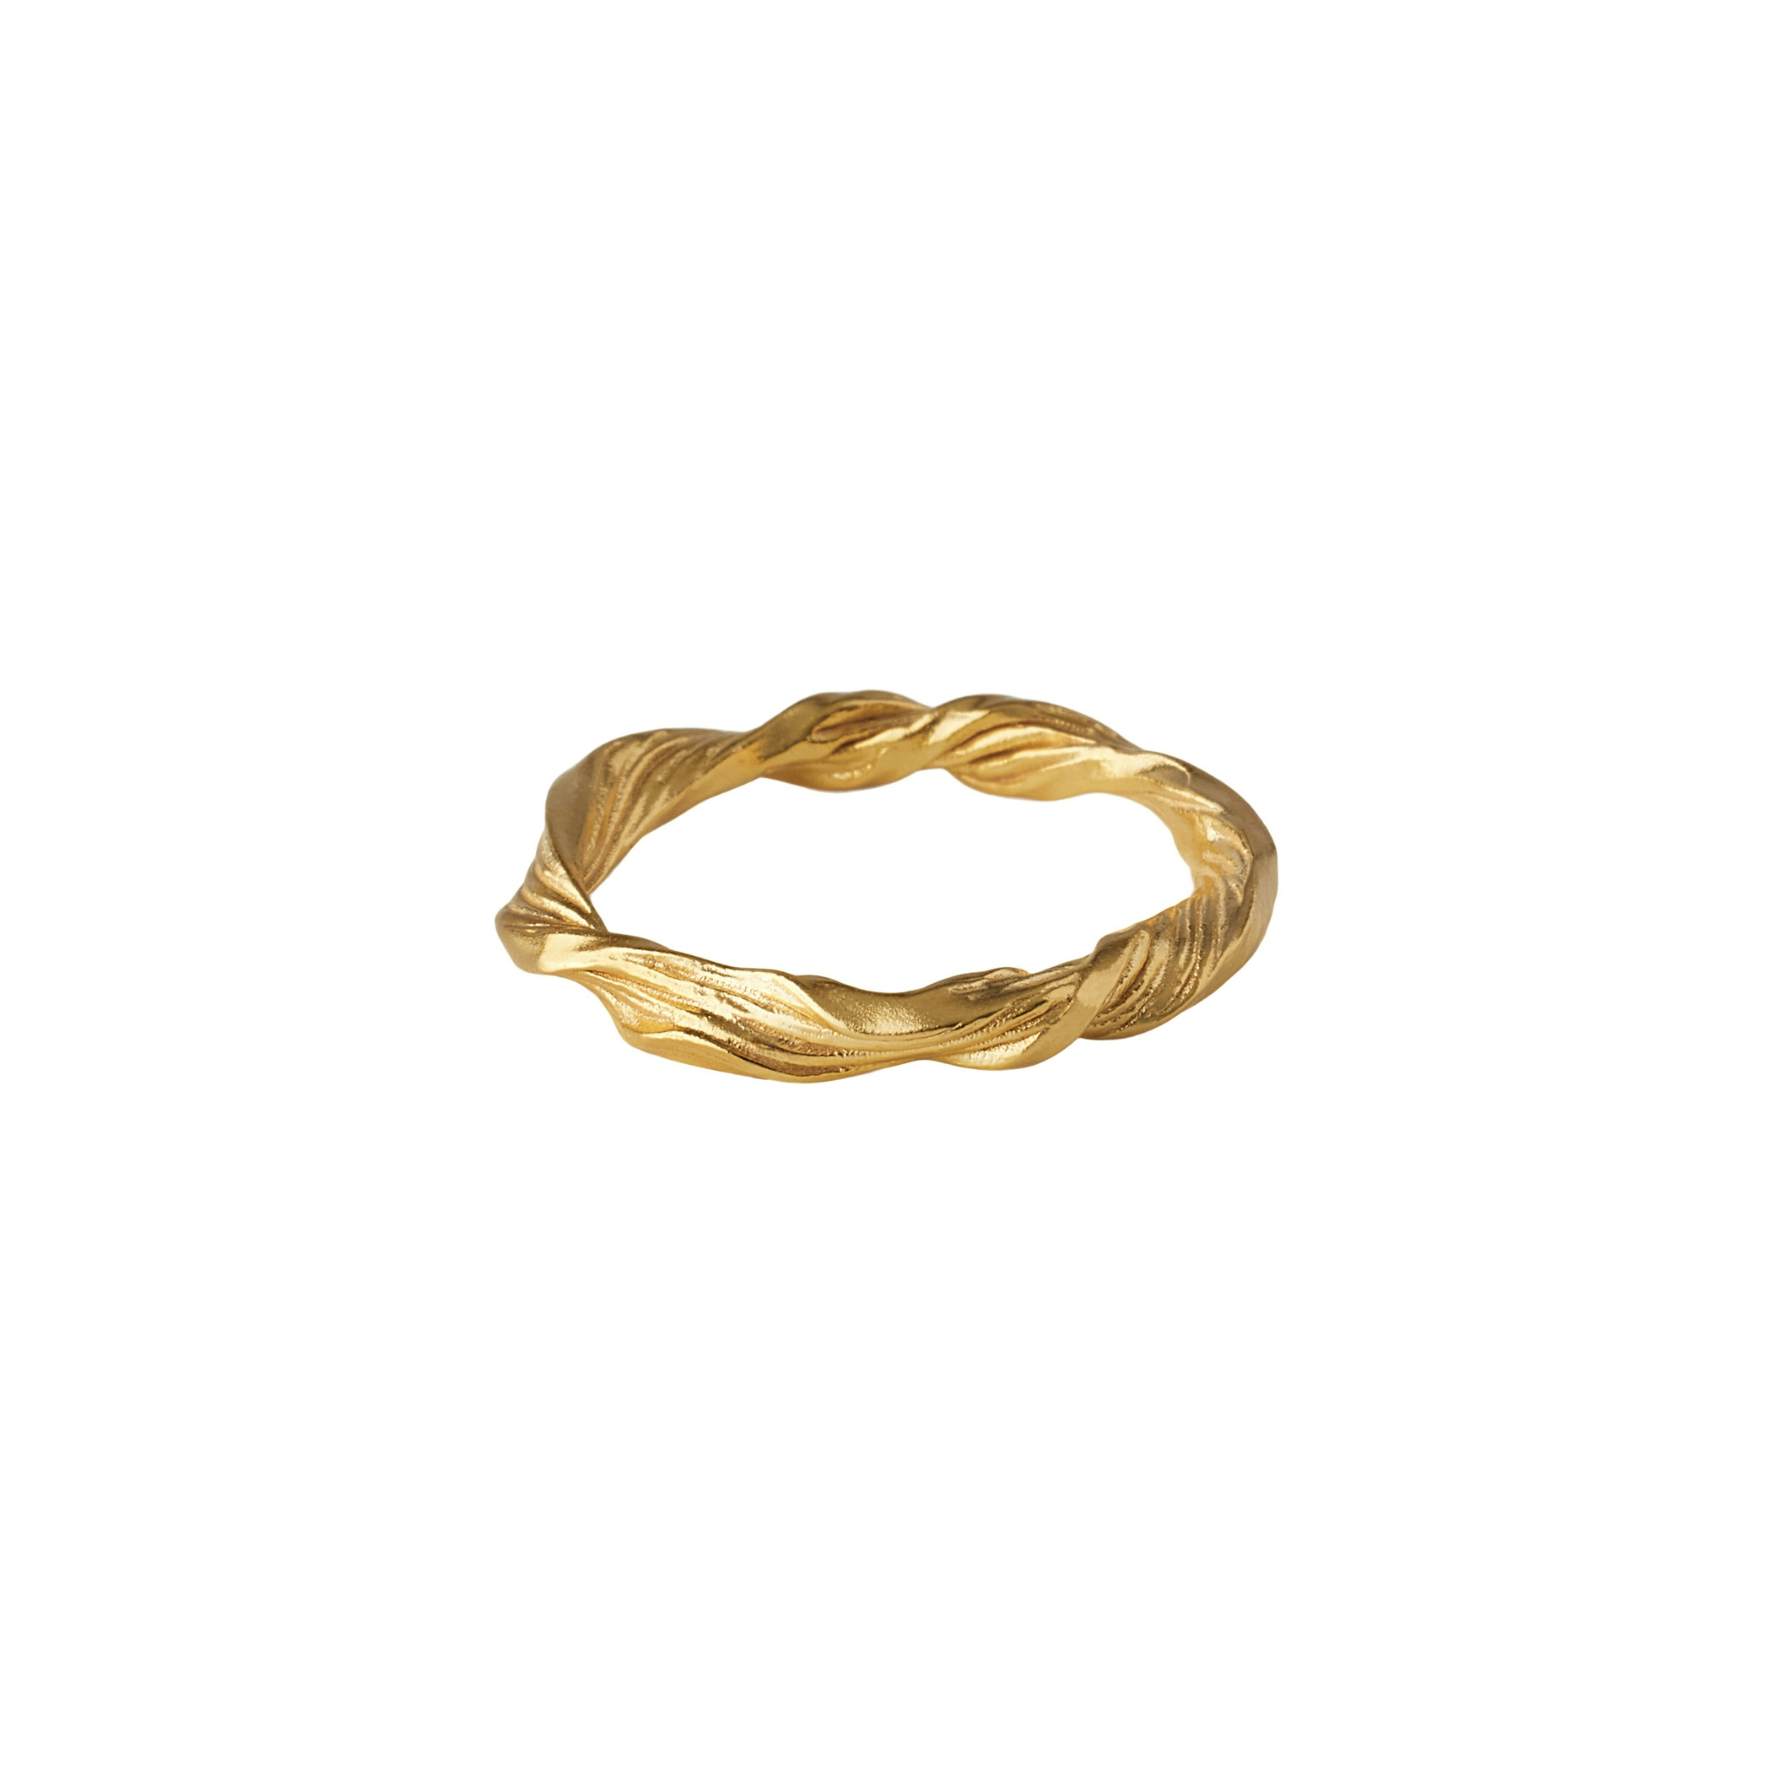 Dancing Wave Ring from Pernille Corydon in Goldplated-Silver Sterling 925